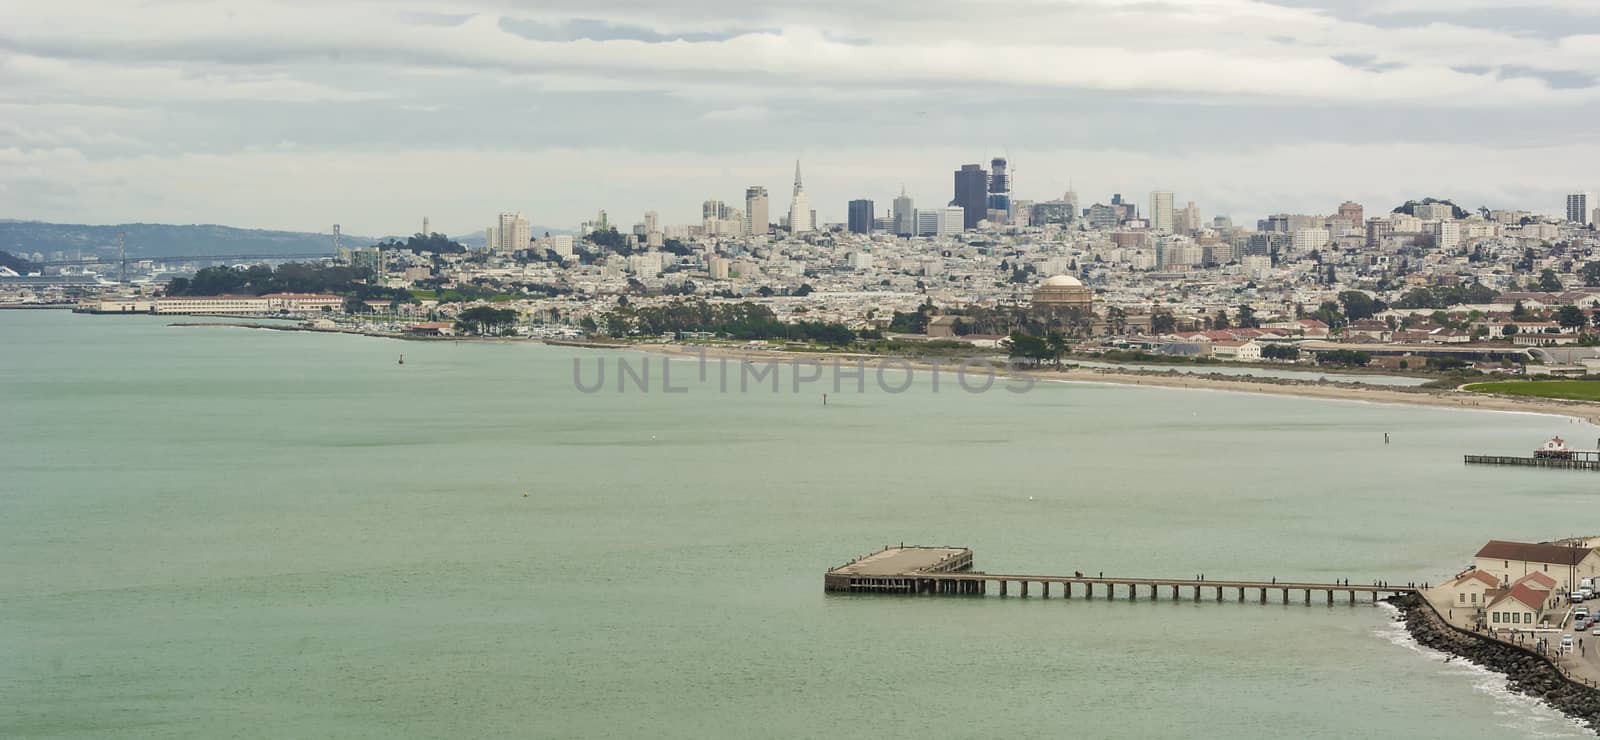 cityscape of San Francisco and skyline in a cloudy day